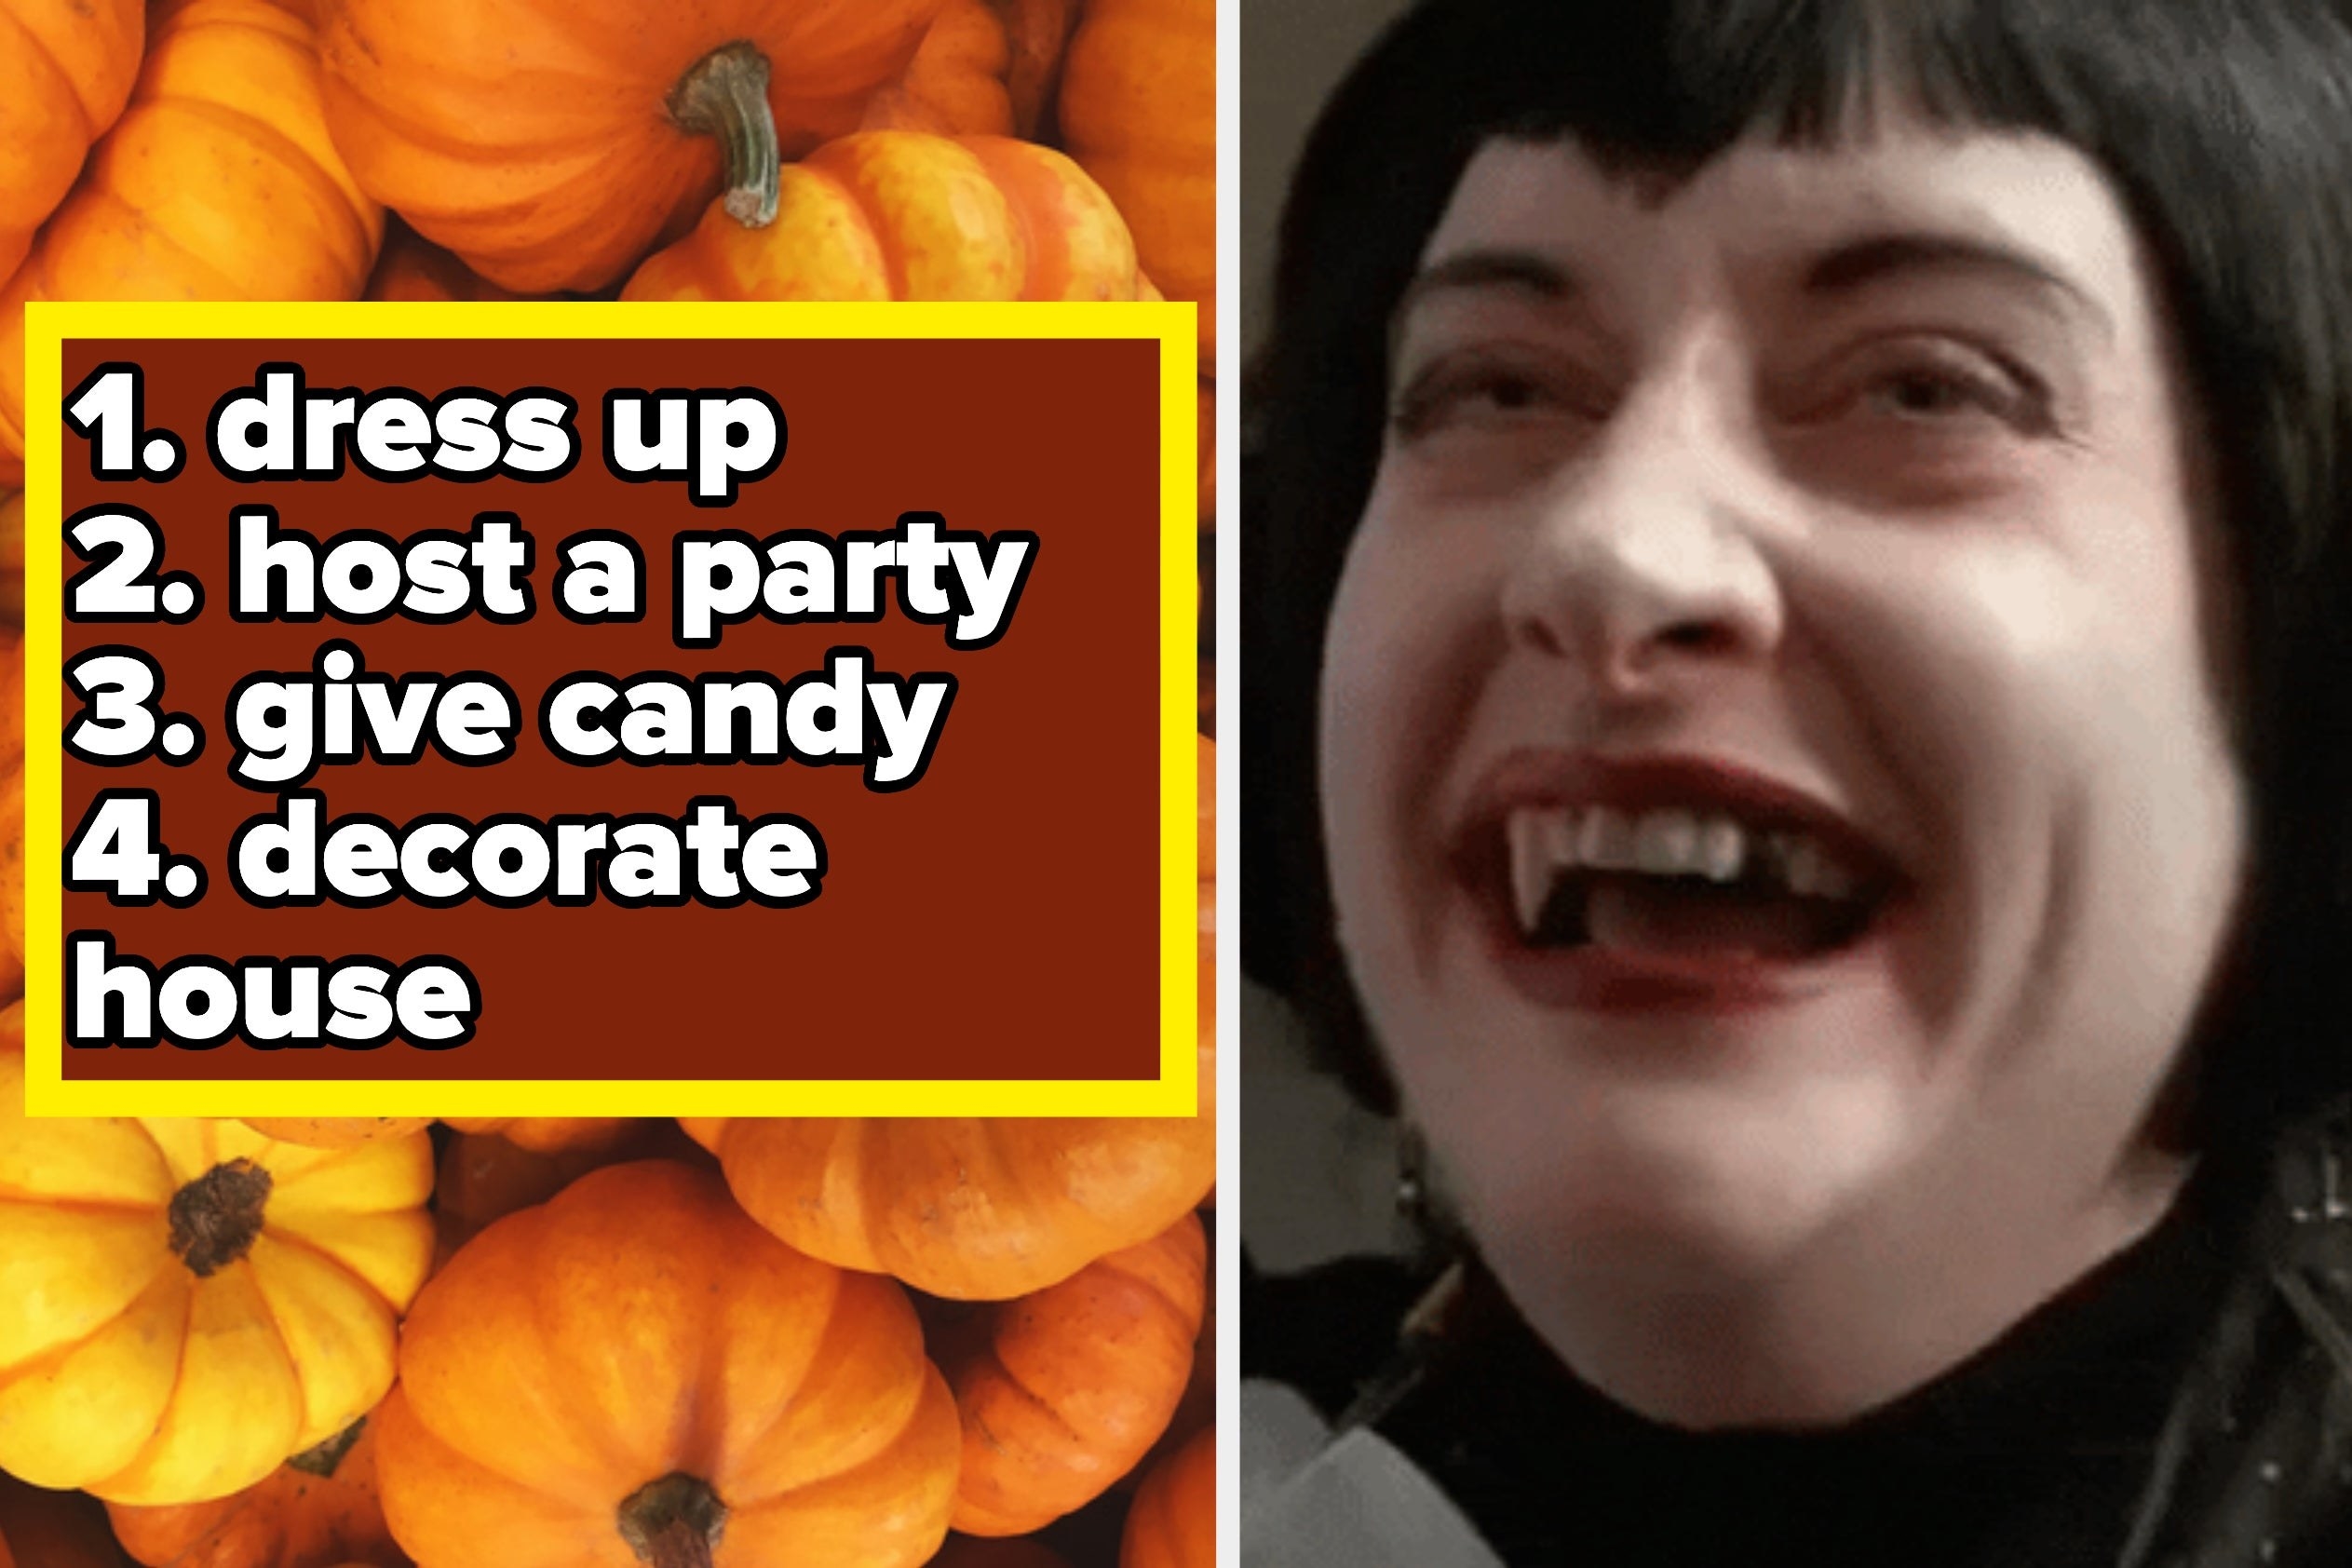 Two images; on the left: pumpkins with the text &quot;1. dress up, 2. host a party, 3. give candy, 4. decorate house&quot; overlayed on top and on the right: a woman dressed up as a vampire and laughing